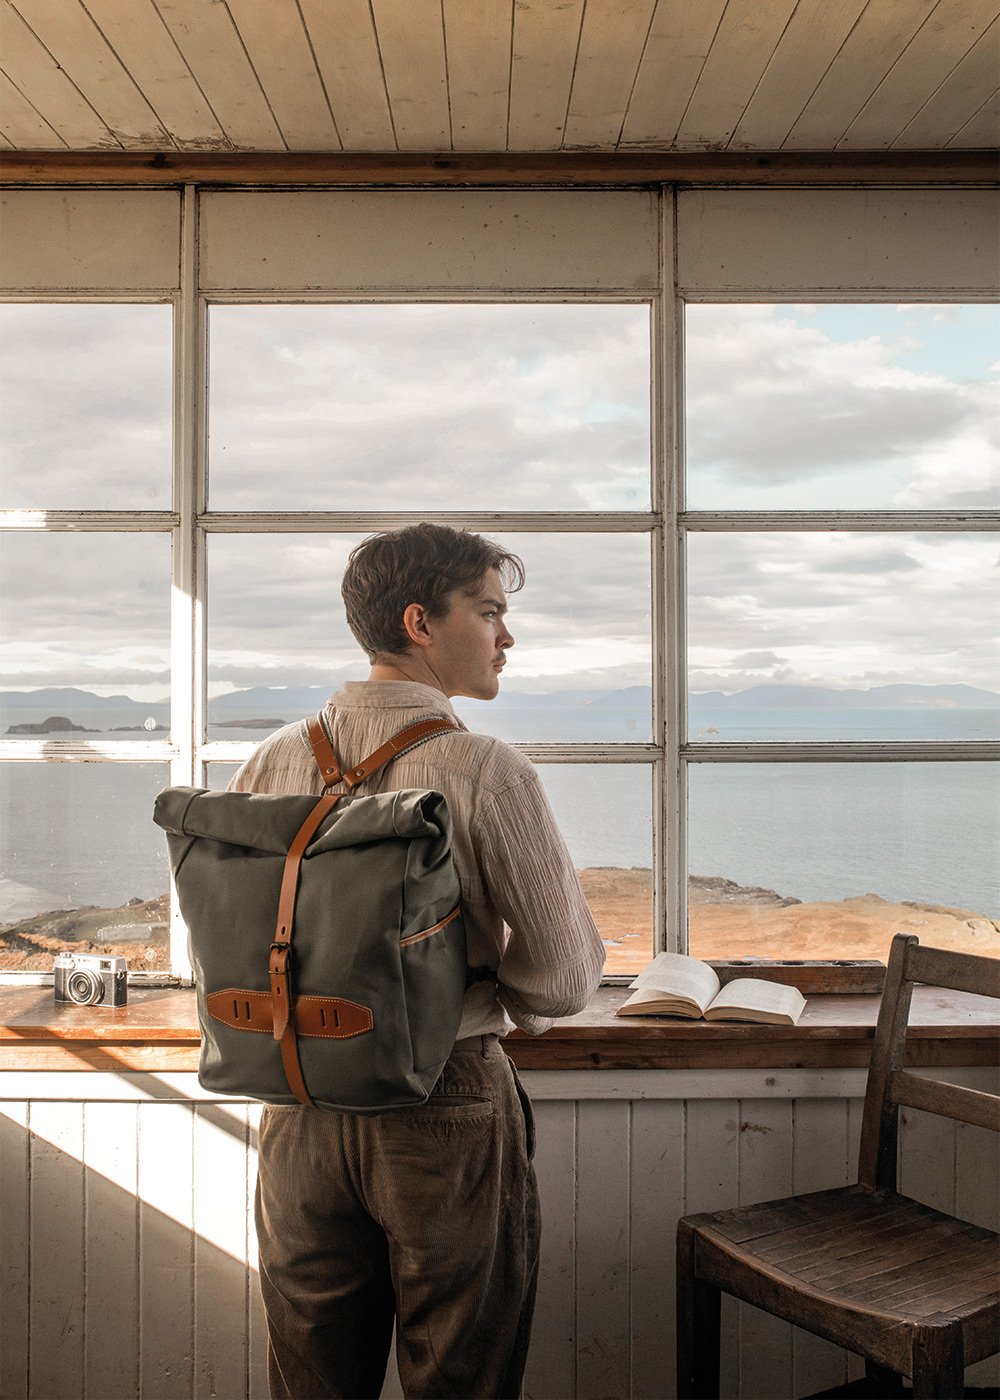 A man carries a canvas backpack into a lighthouse cabin